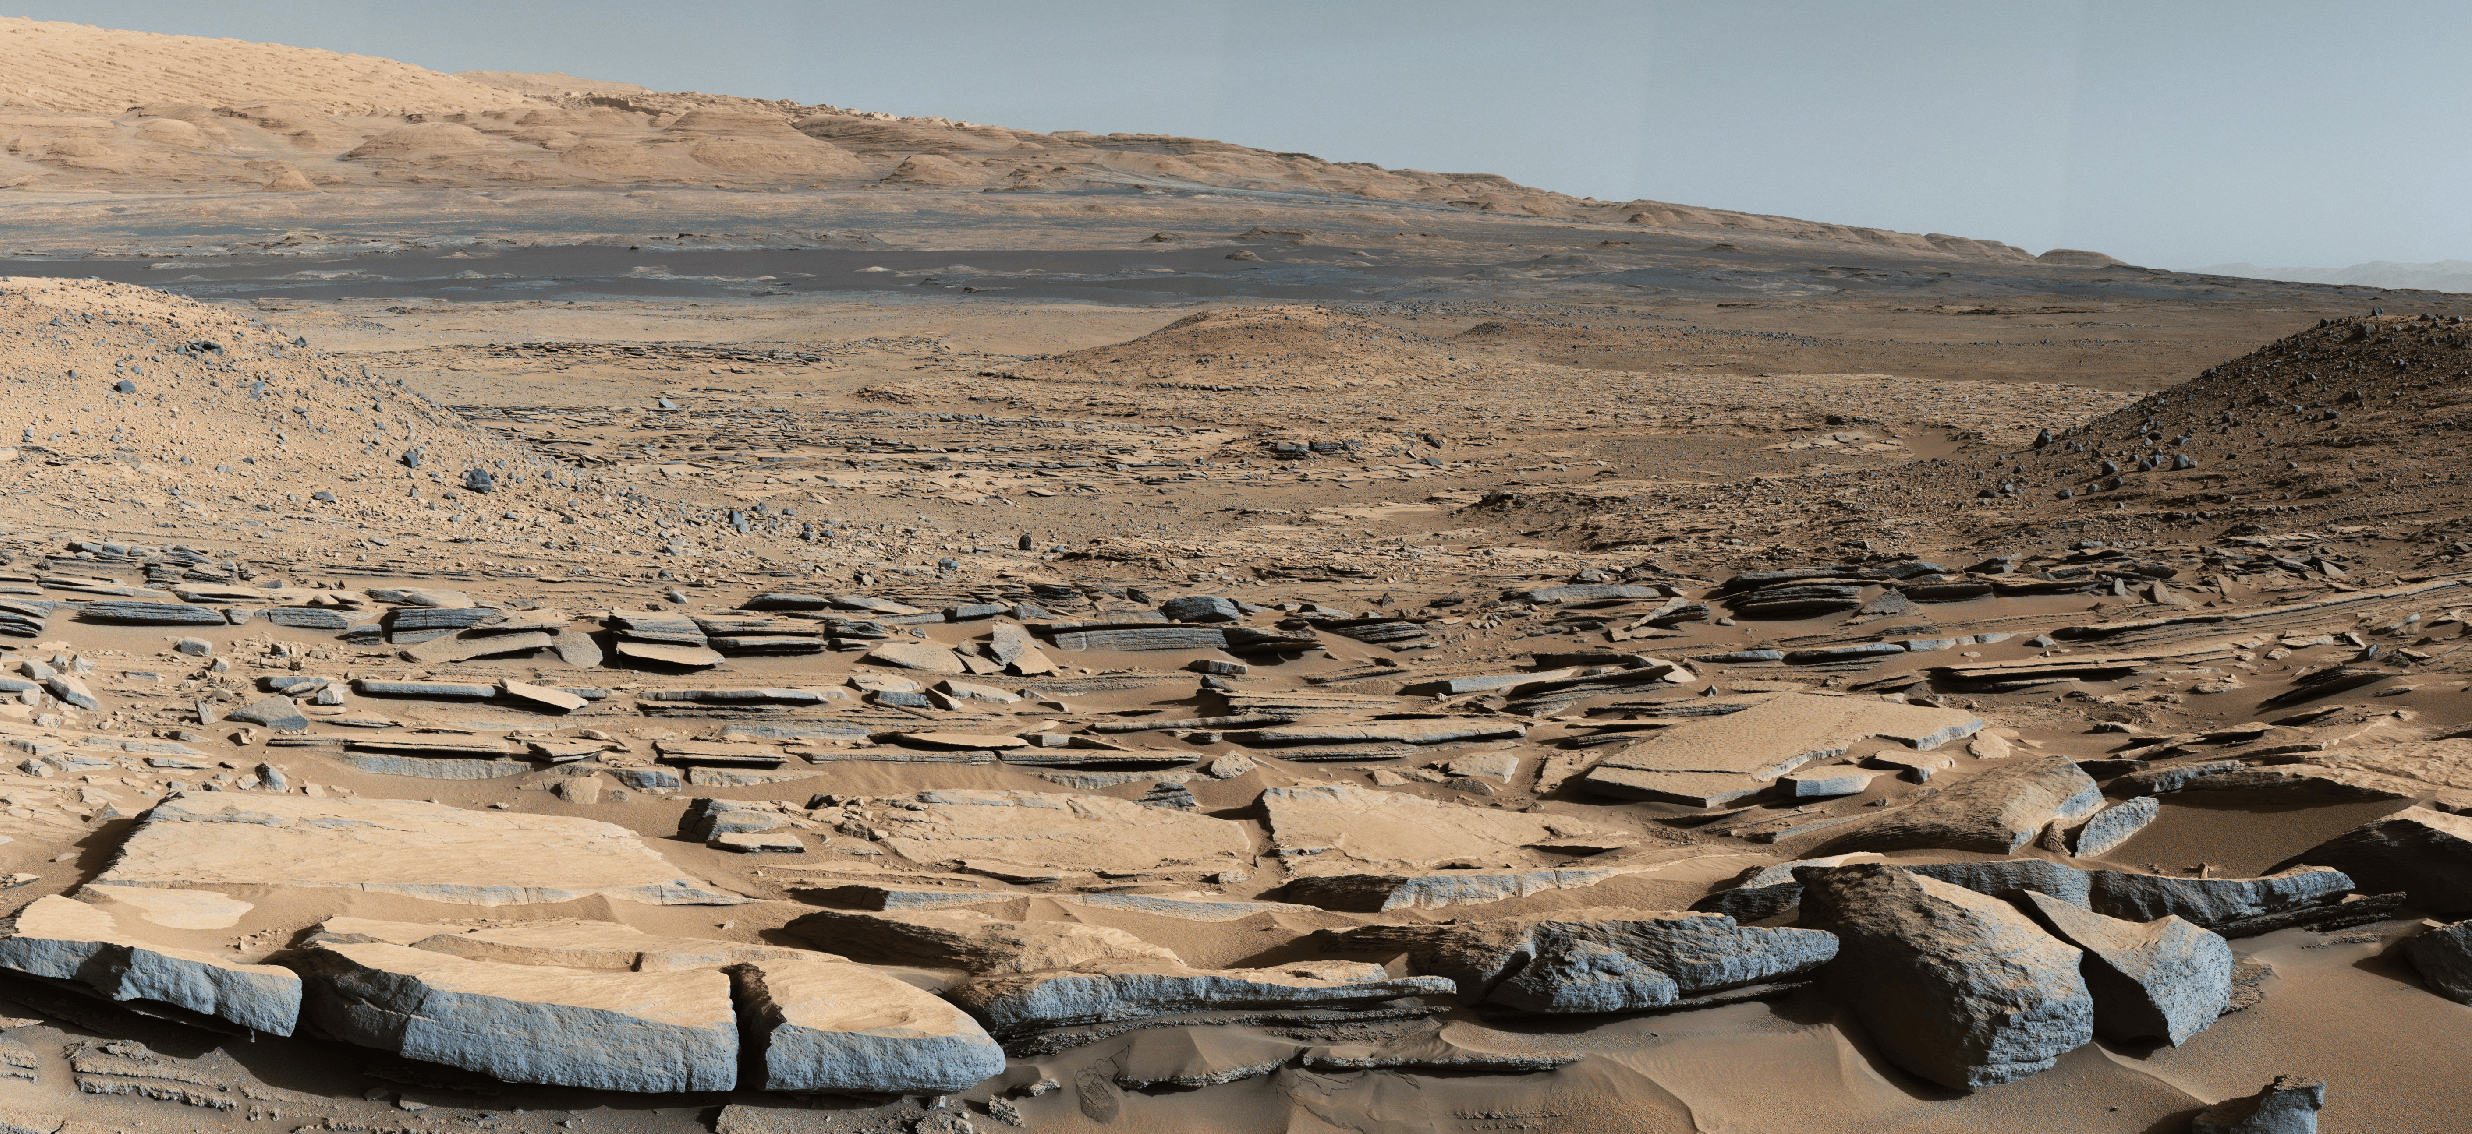 Curiosity Mars Rover's Most Breathtaking Views of the Red Planet